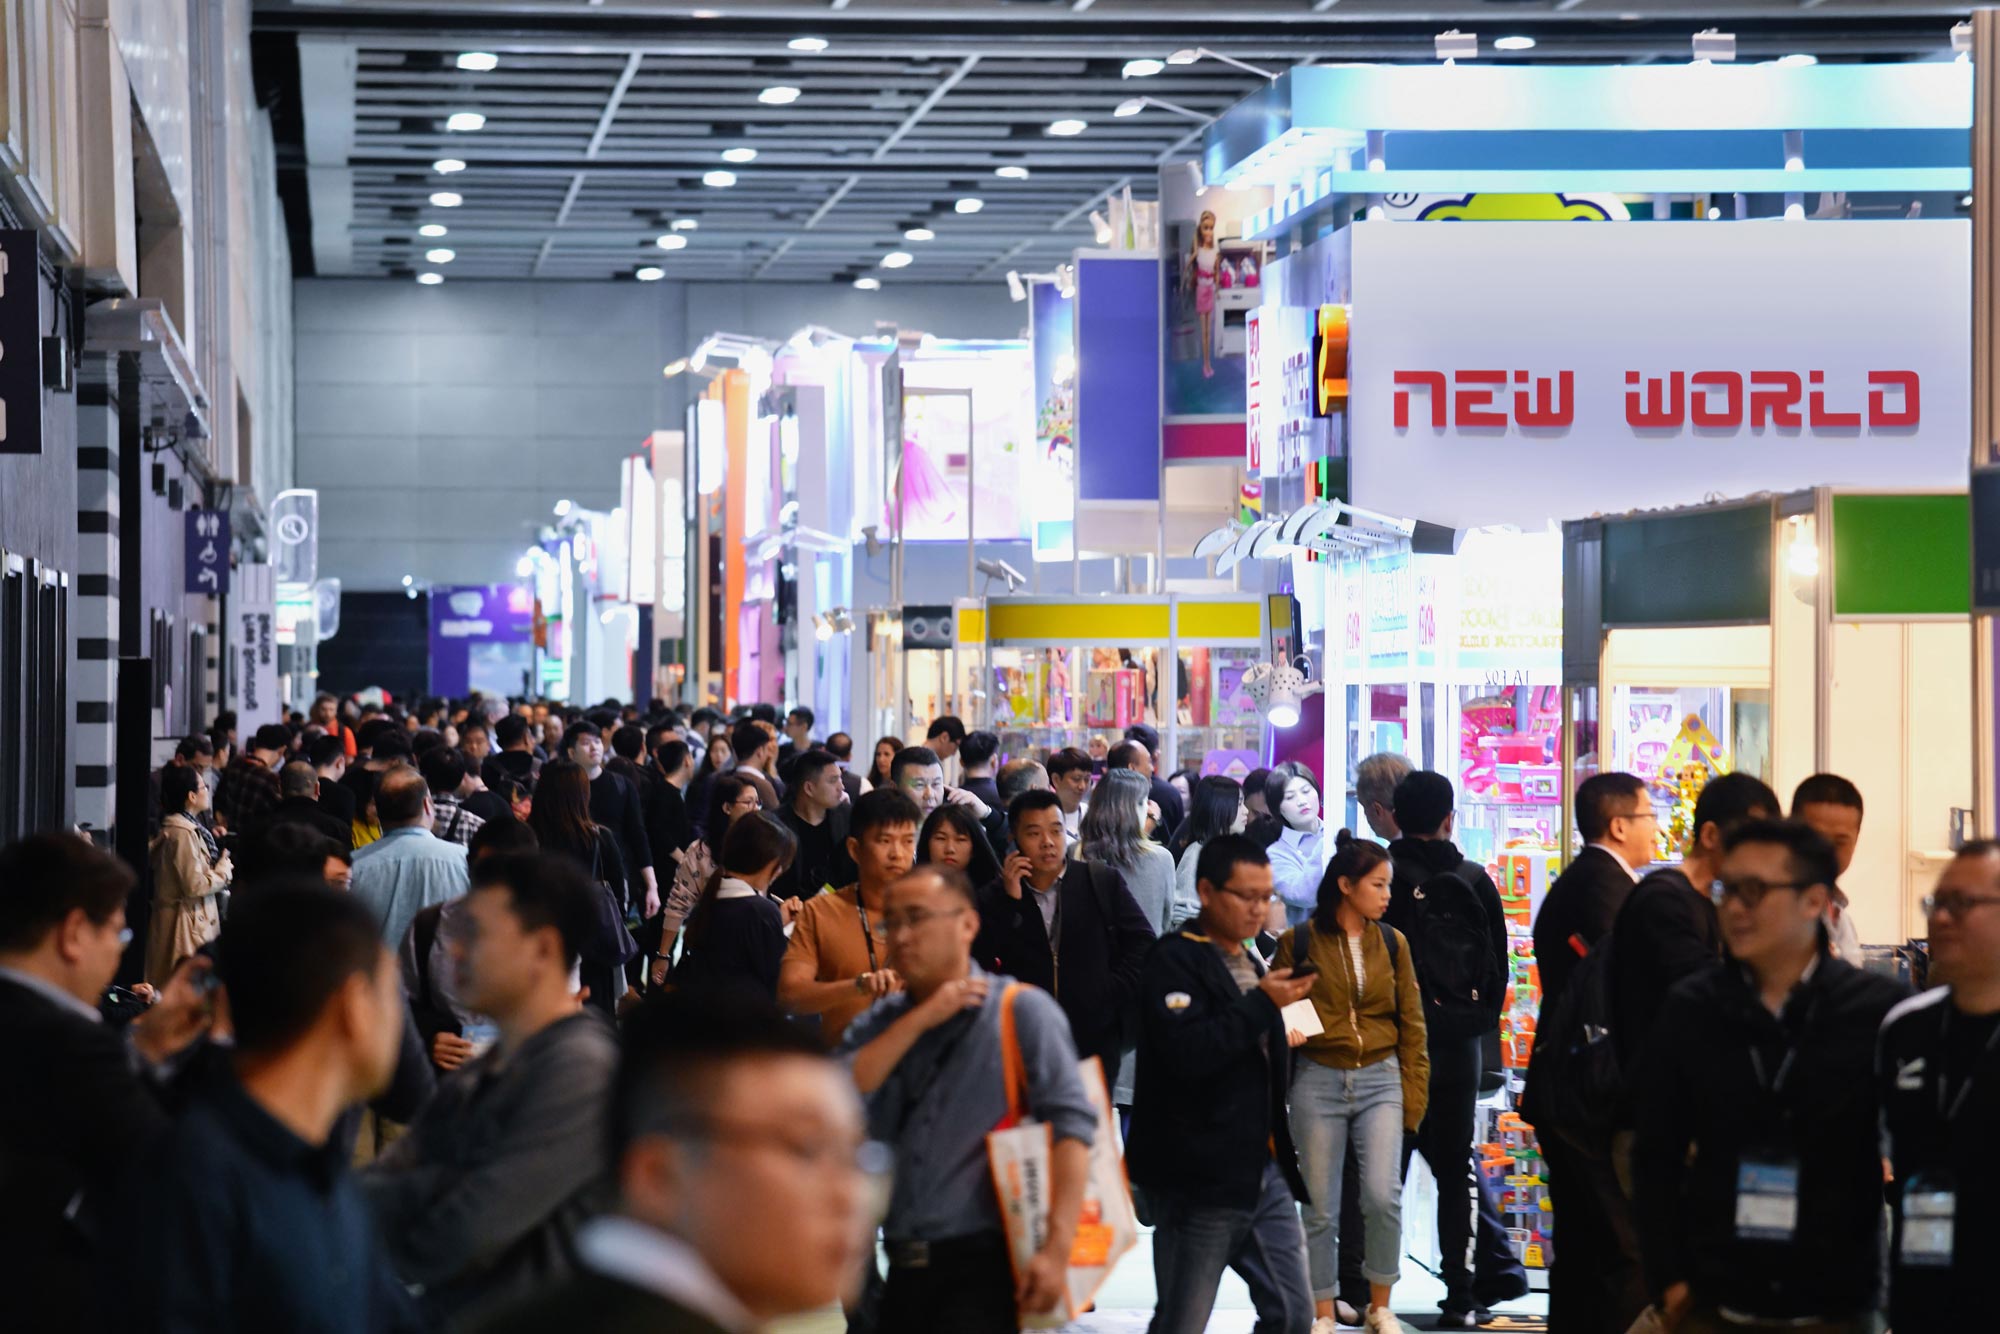 An event hosted at Hong Kong Convention and Exhibition Centre